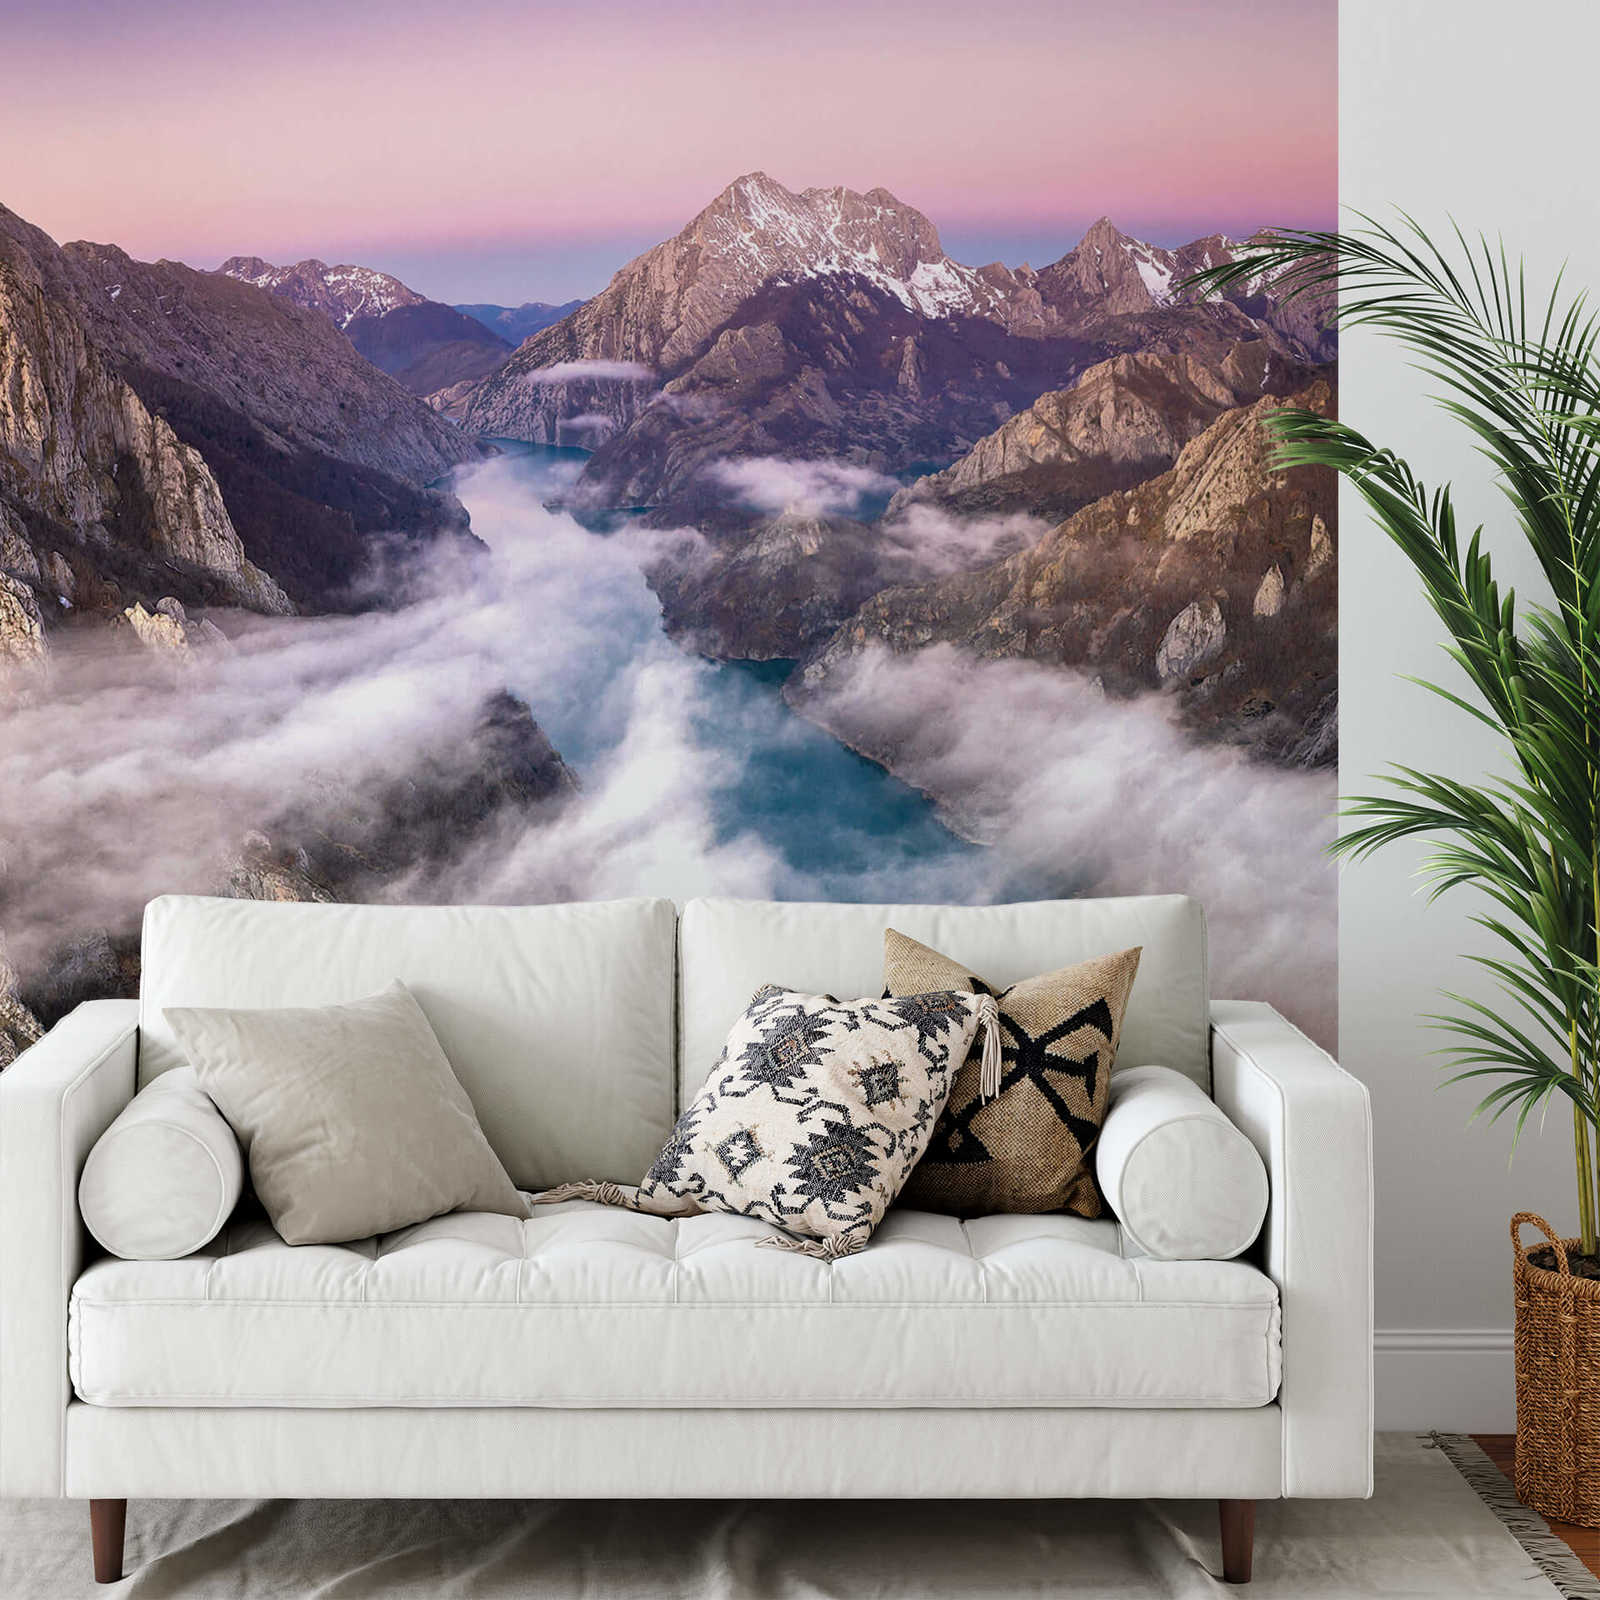             narrow photo wallpaper mountains with fog - colourful
        